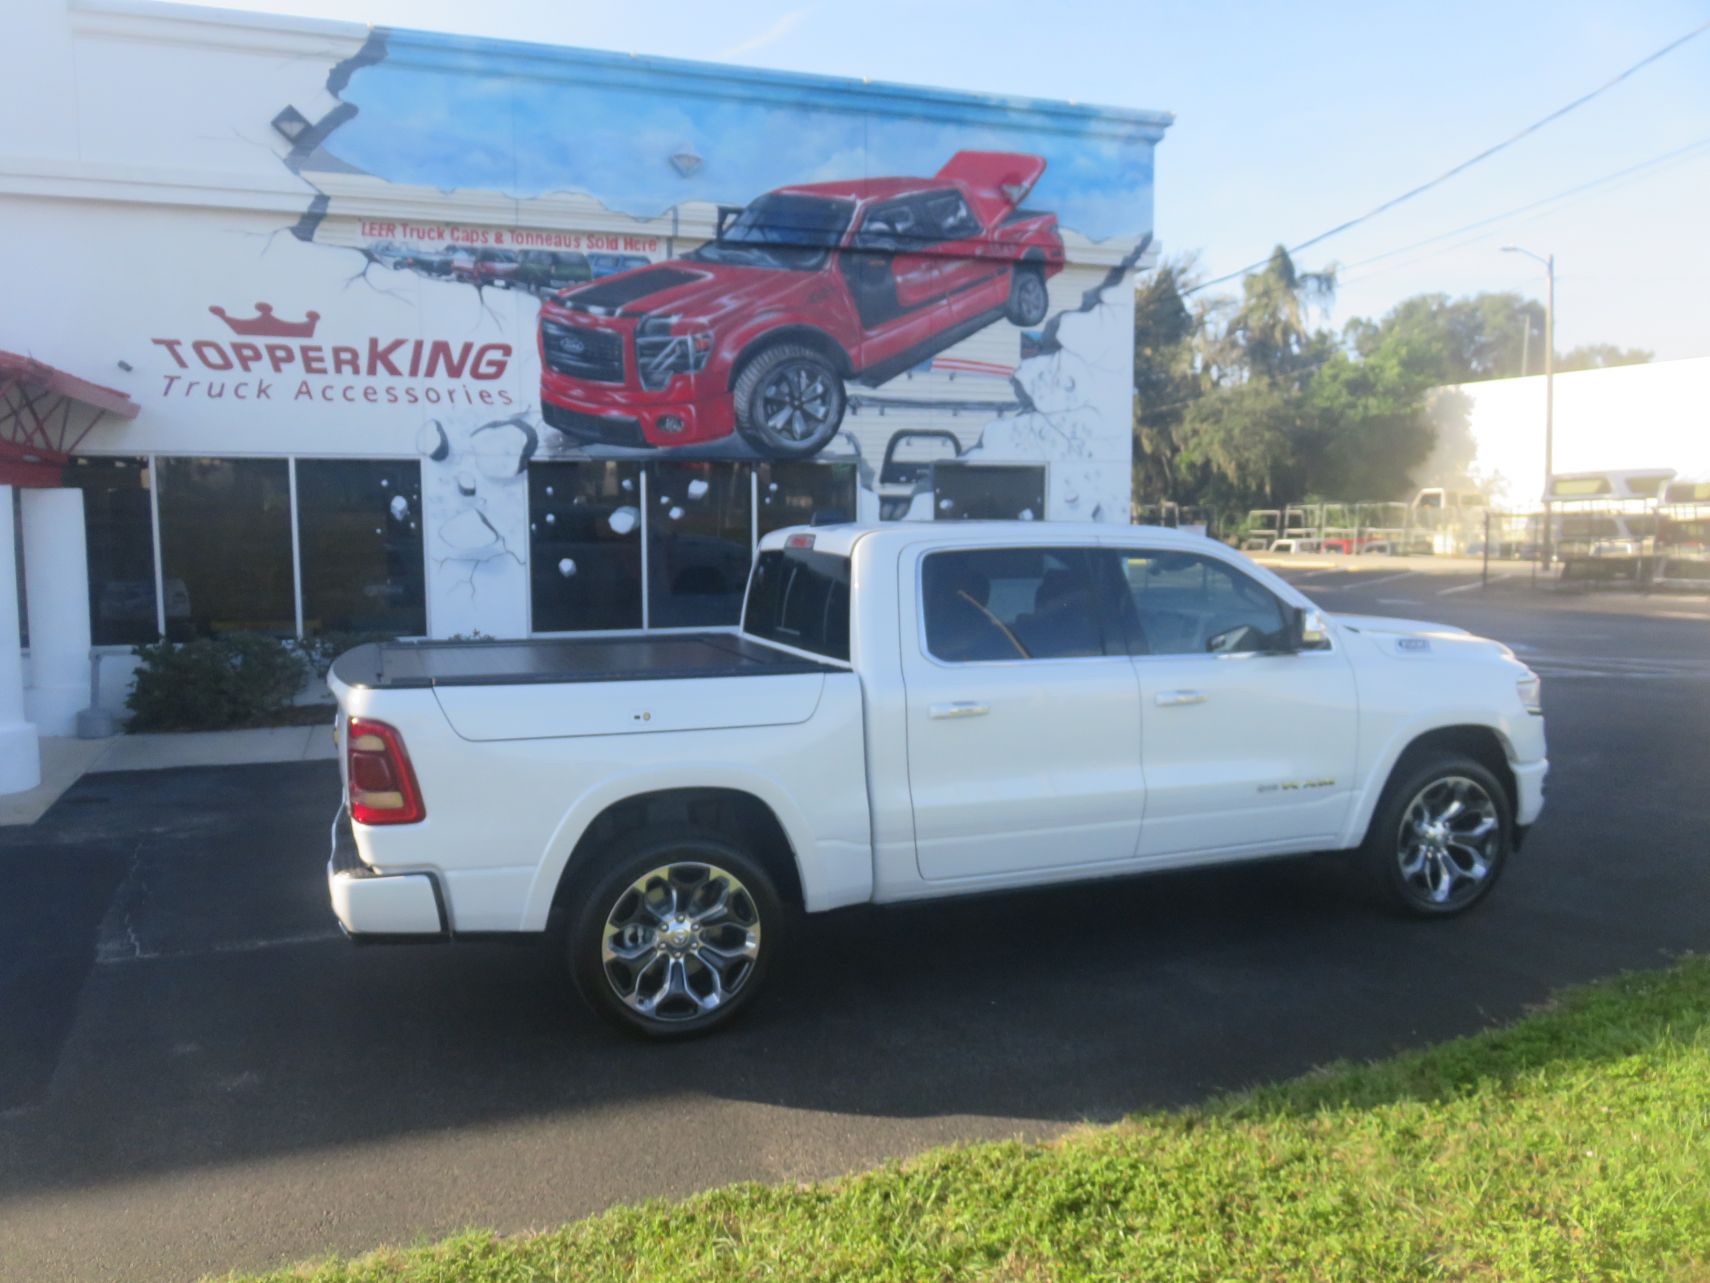 2020 Dodge Ram with Full Metal JackRabbit Tonneau, Chrome. Tint Hitch, by TopperKING in Brandon, FL 813-689-2449 or Clearwater, FL 727-530-9066. Call Today!